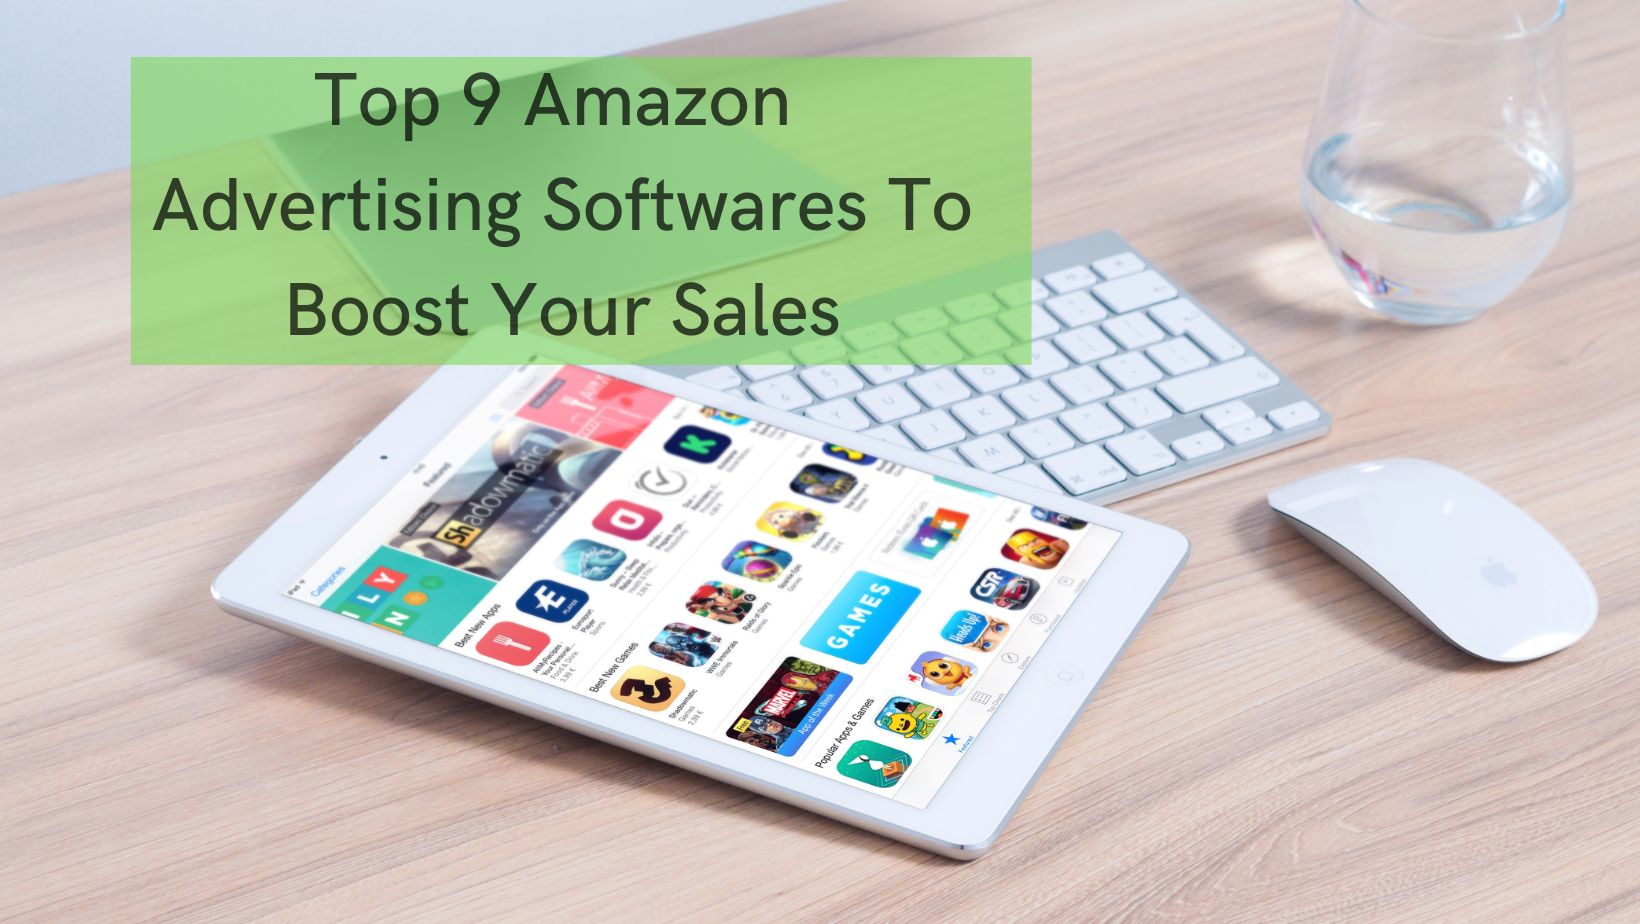 Top 9 Amazon Advertising Softwares To Boost Your Sales